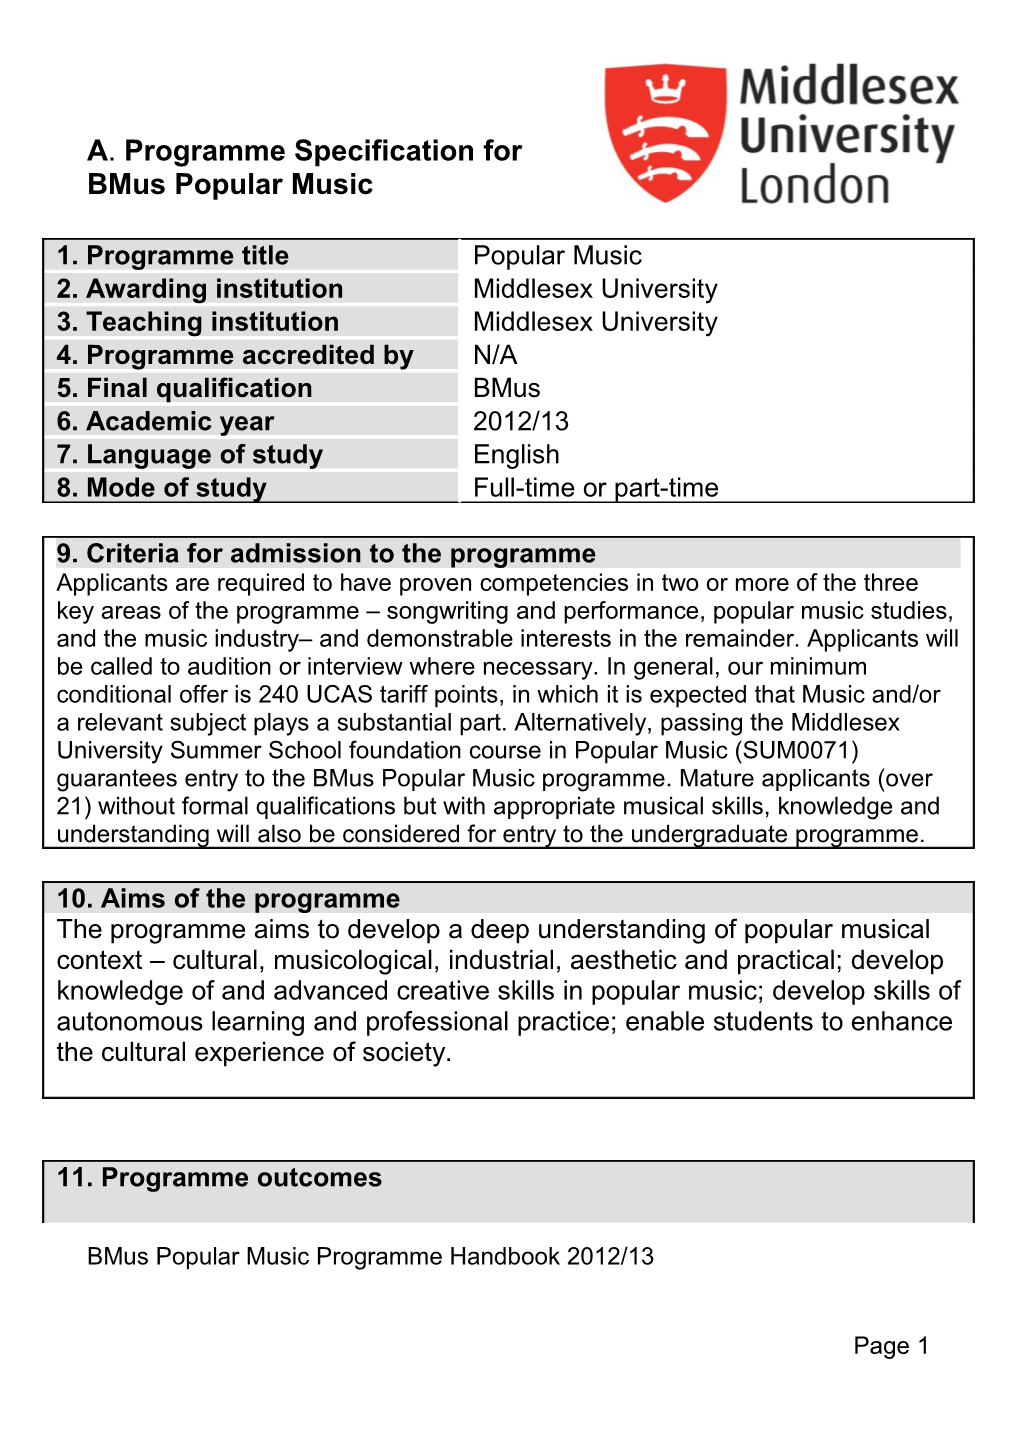 A. Programme Specification for Bmus Popular Music